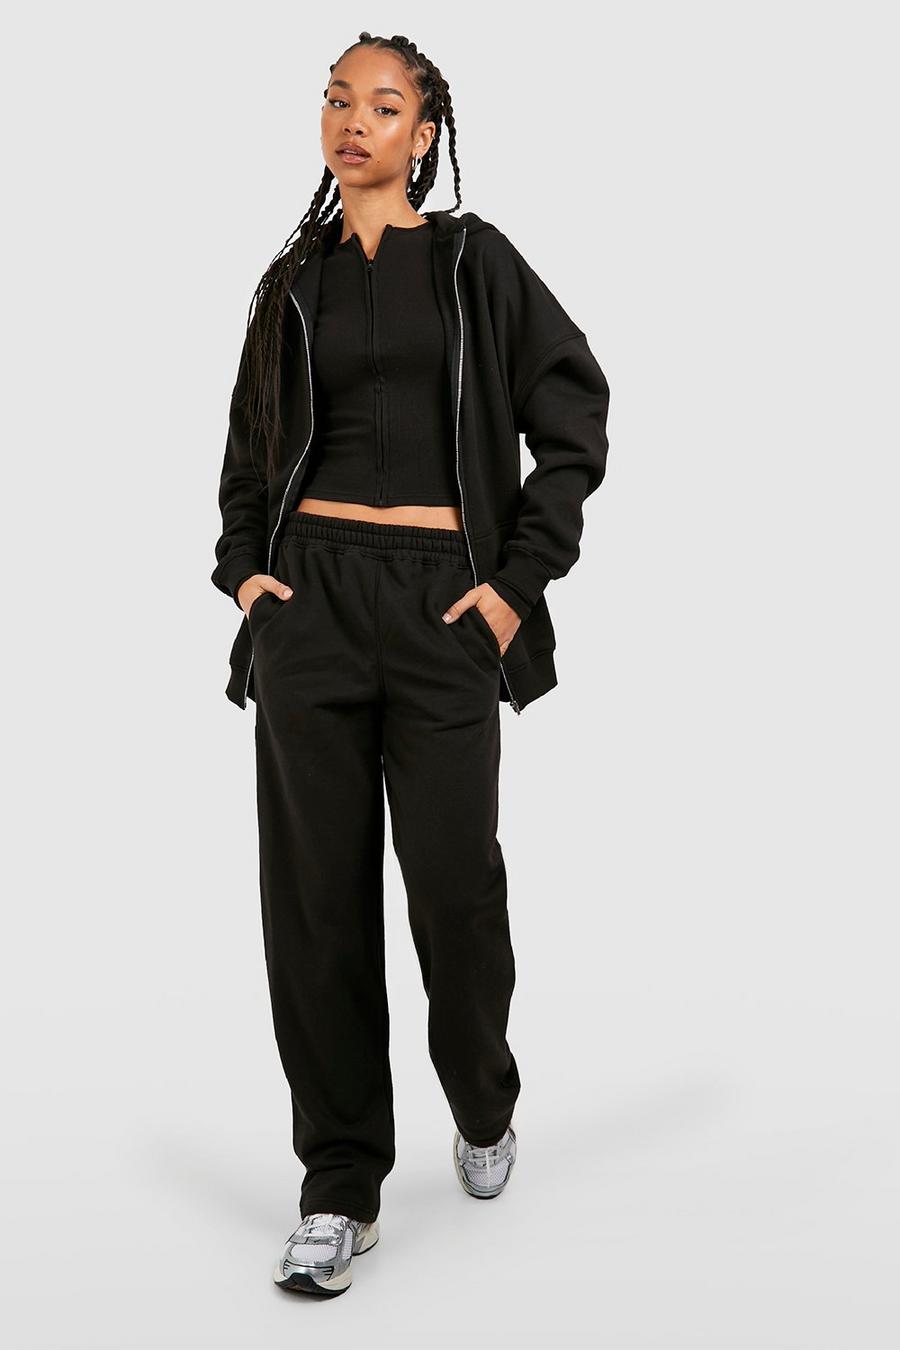 Black Tall Ribbed Zip Crop Top 3 Piece Hooded Tracksuit